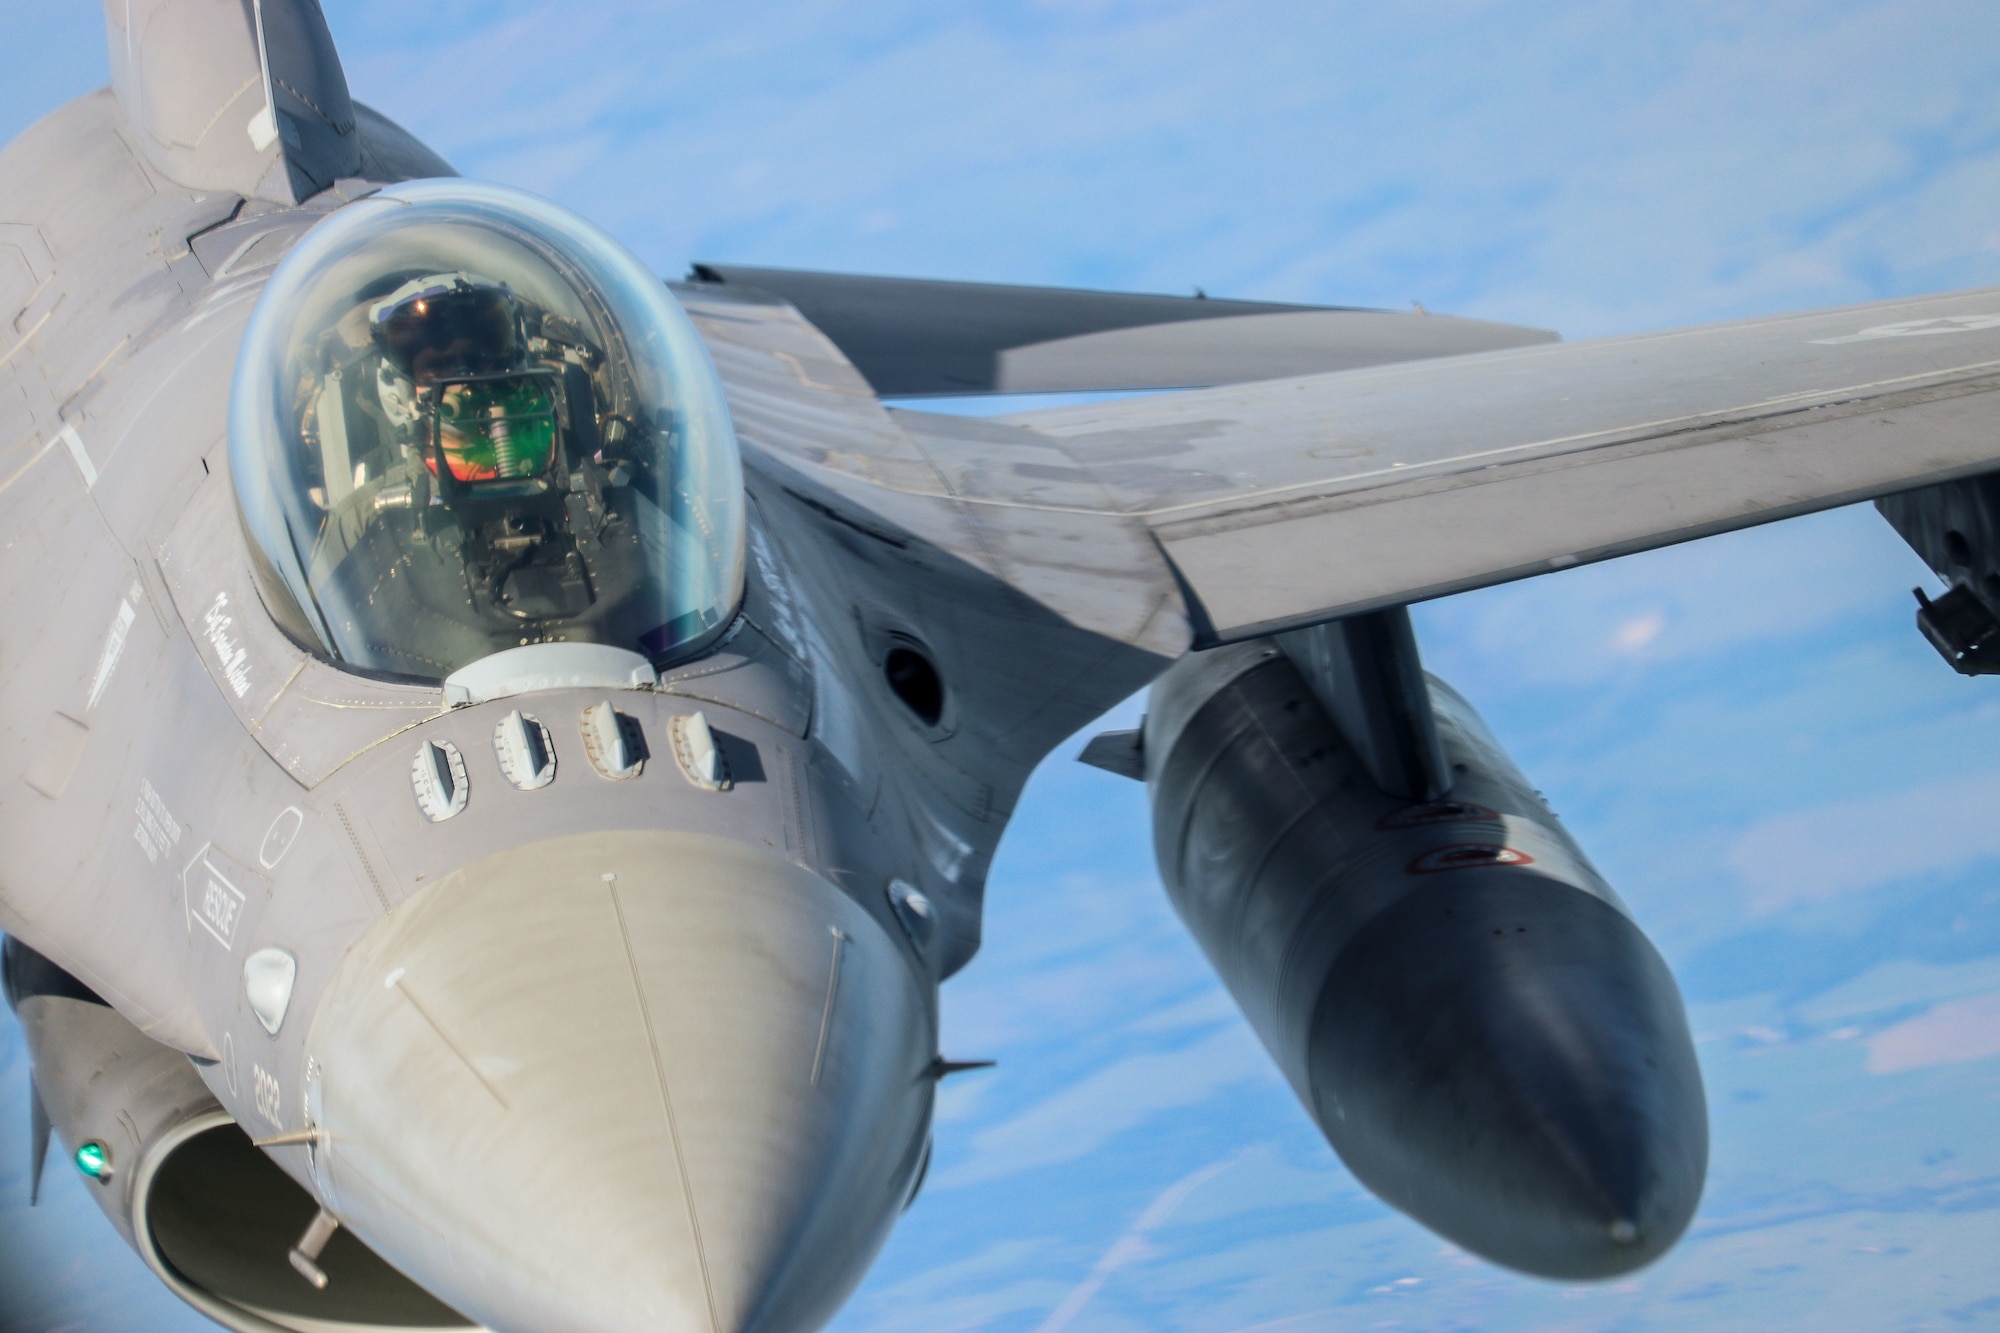 A 138th Fighter Wing F-16 Fighting Falcon flies behind a 507th Air Refueling Wing KC-135R Statotanker during a congressional orientation flight, Aug. 15, 2019, at Tinker Air Force Base, Oklahoma. The Okies shared the Reserve mission and a unique experience with the congressional delegation. (U.S. Air Force photo by Senior Airman Mary Begy)